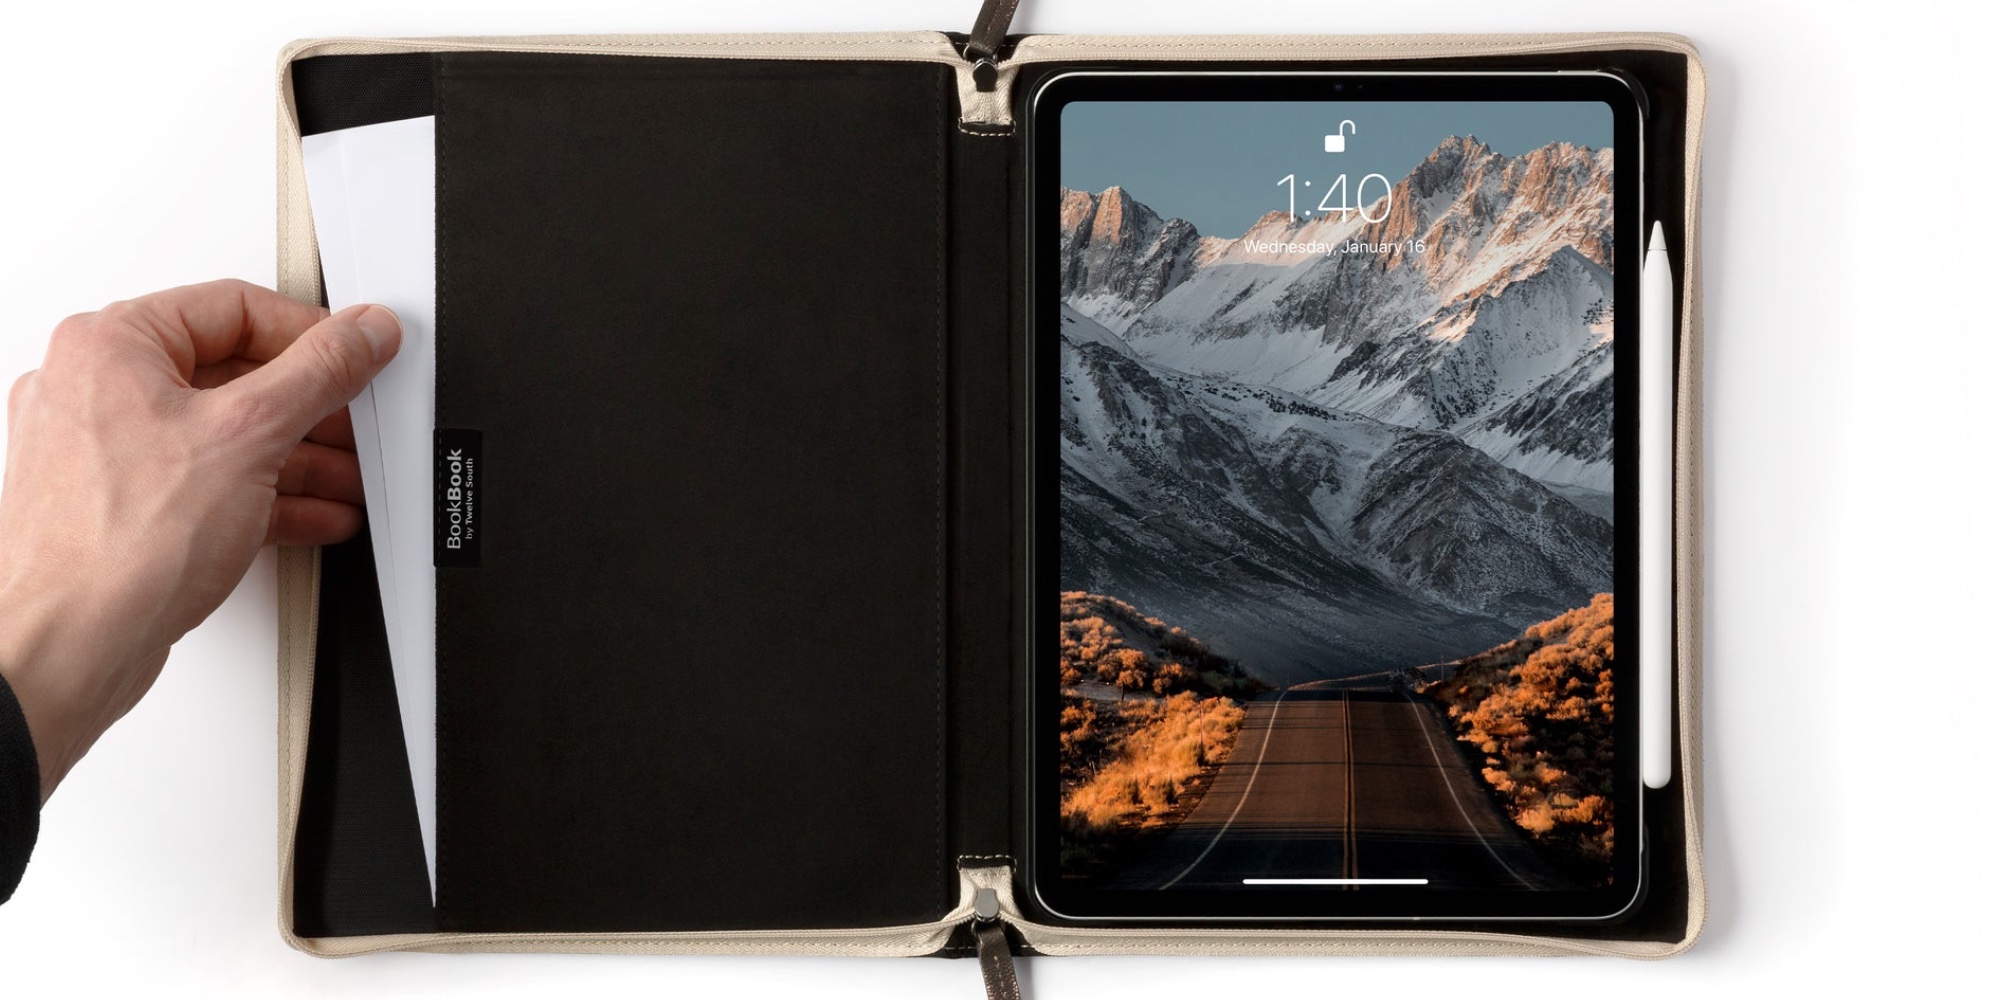 iPad mini BookBook case from Twelve South now available 9to5Toys